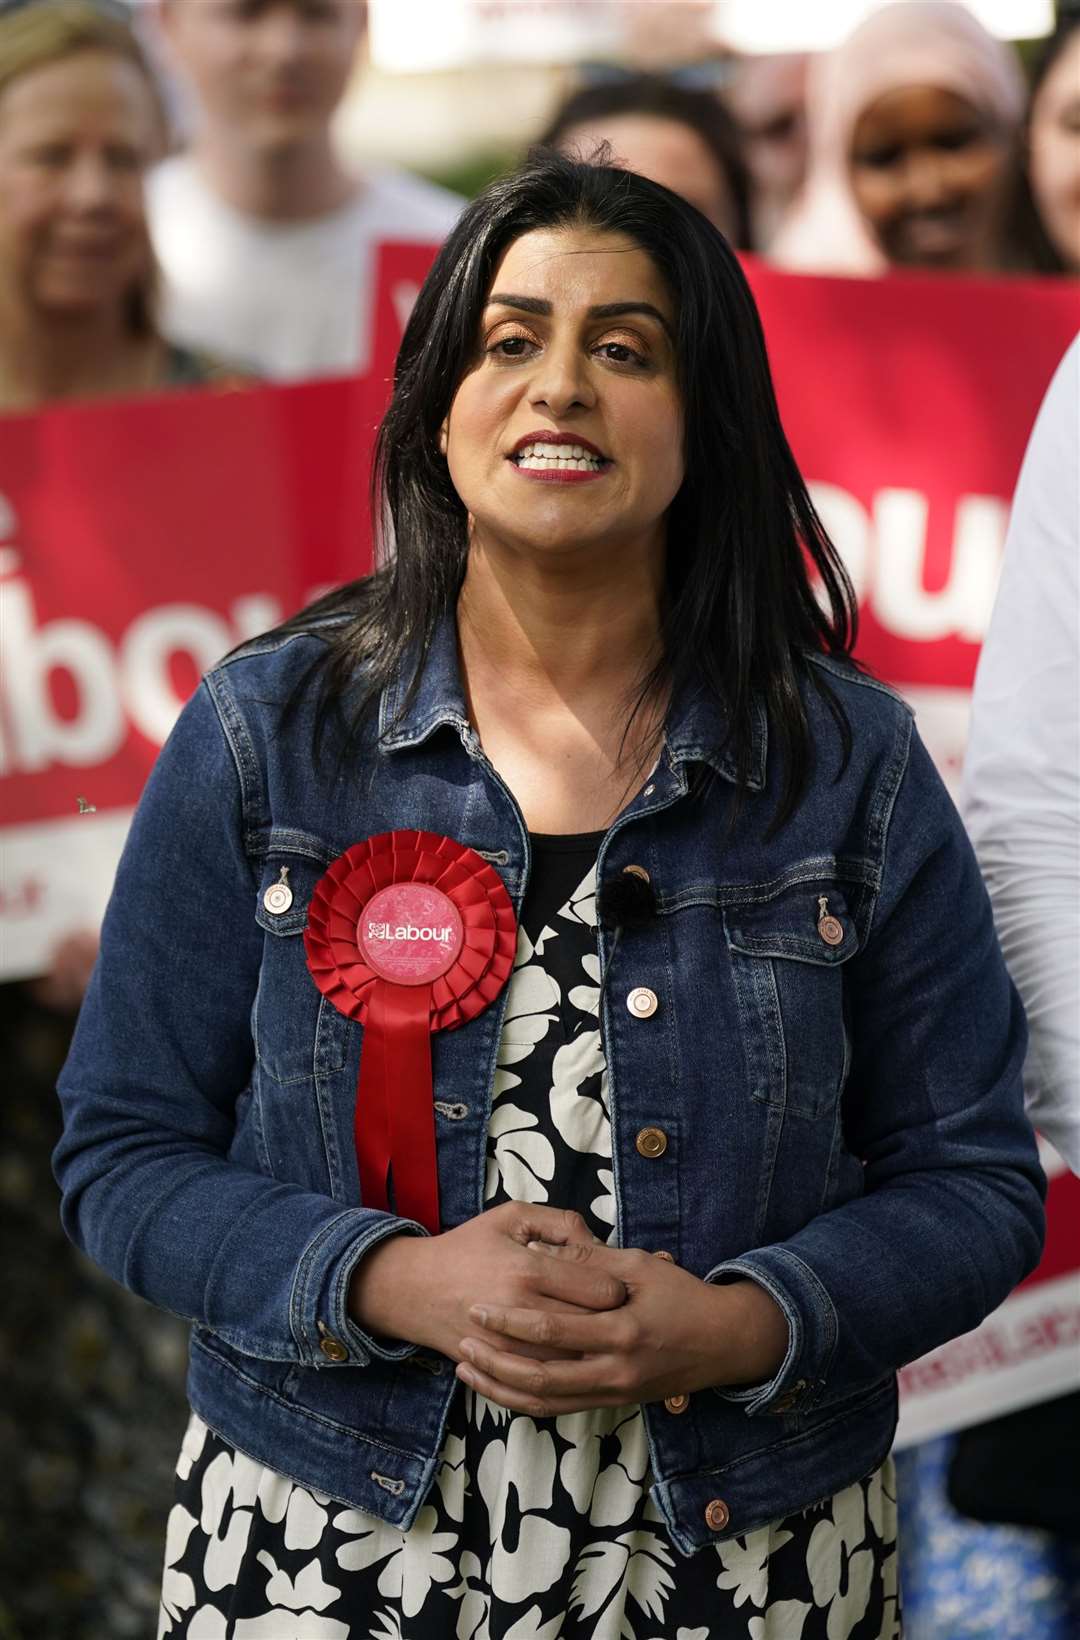 Shabana Mahmood was promoted to shadow justice secretary in the reshuffle (Andrew Matthews/PA)